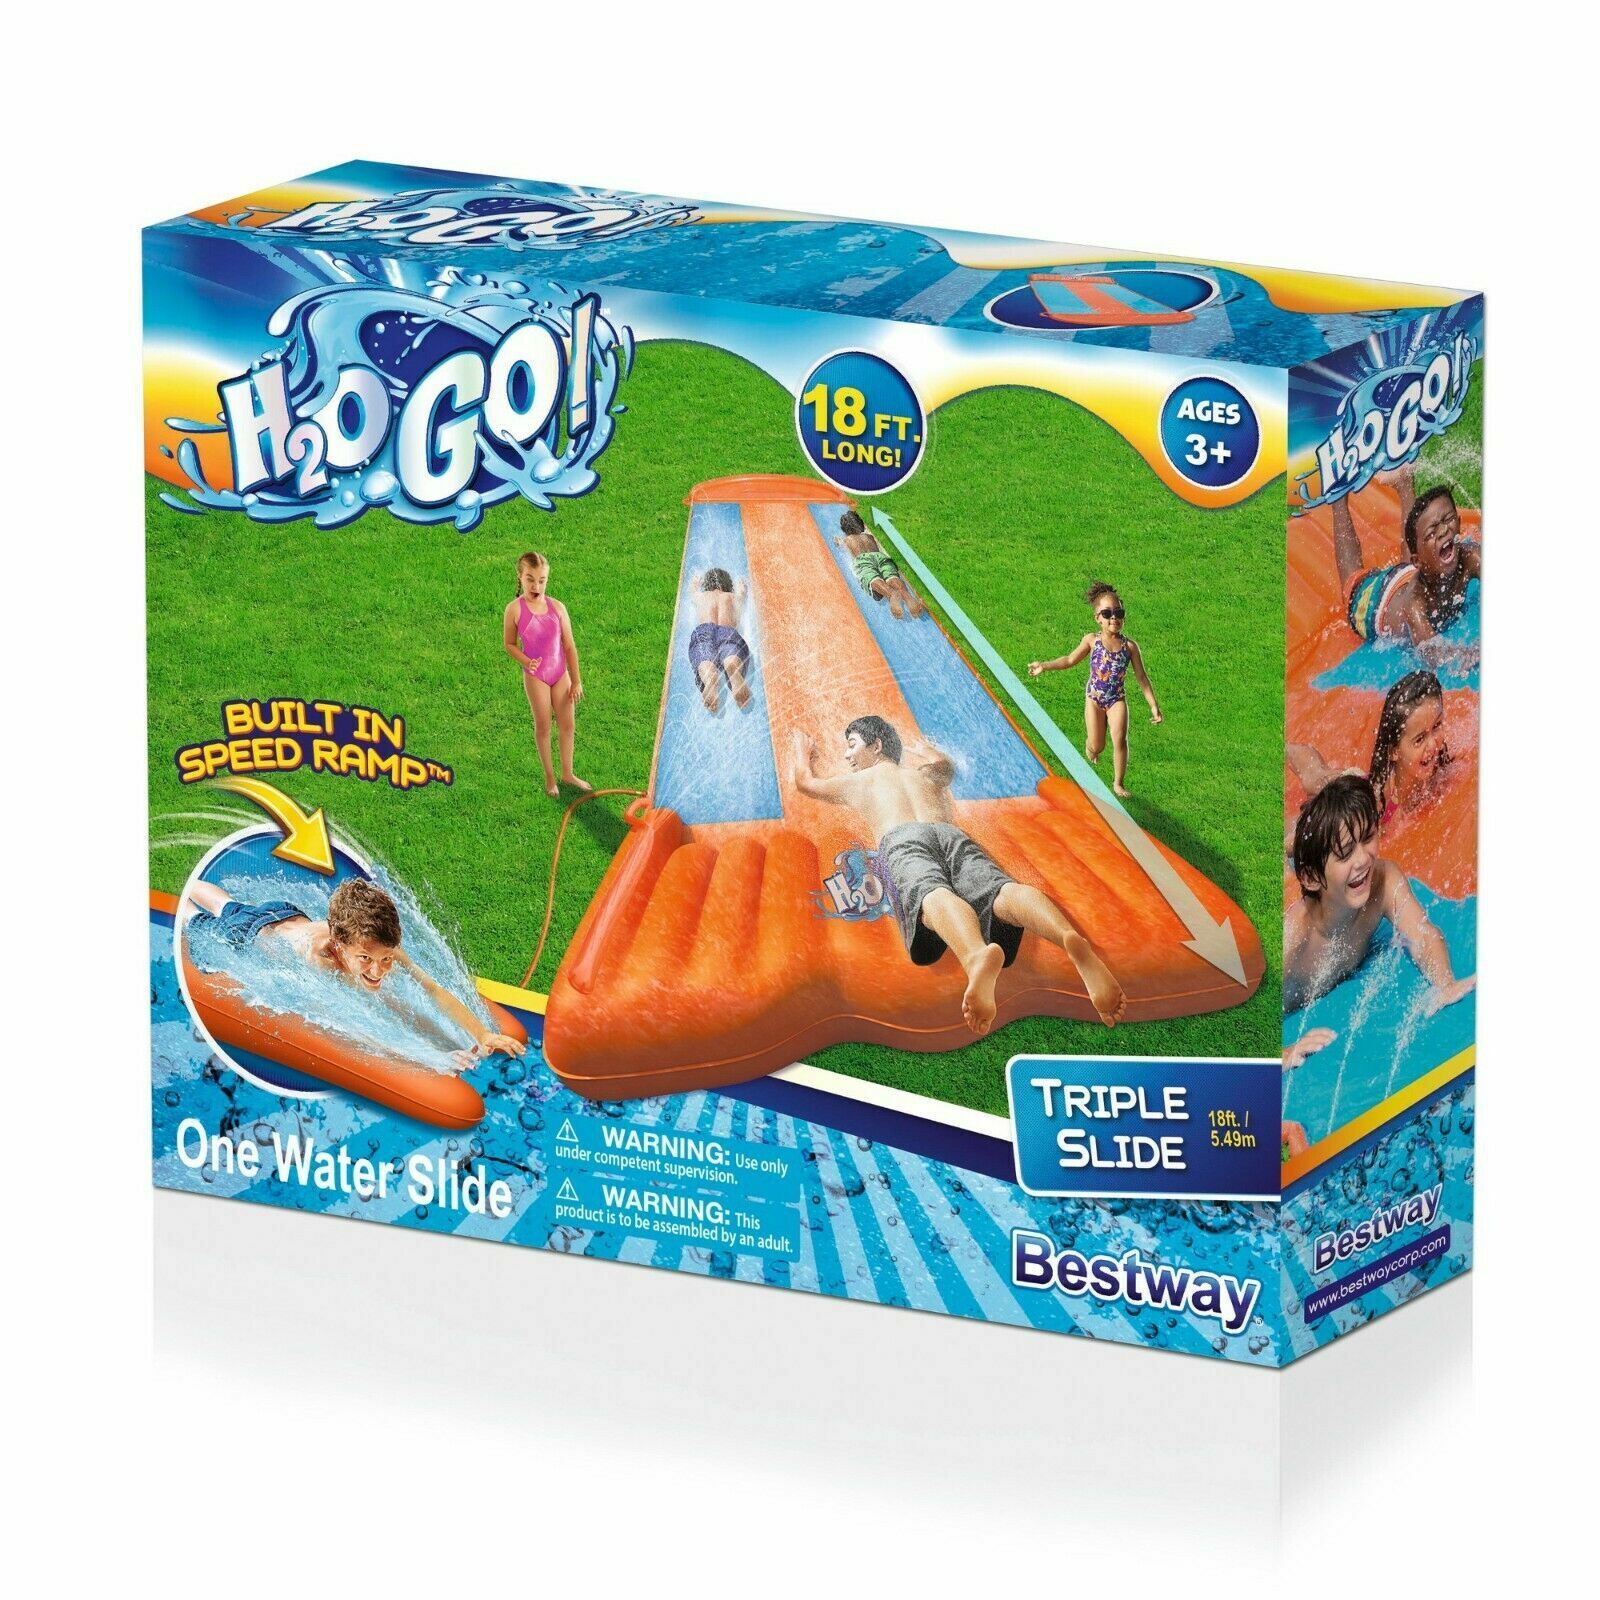 New H2O GO Outdoor Water Triple 5.49m 3 Slide 18ft Lanes one Cheap super special Quantity limited price